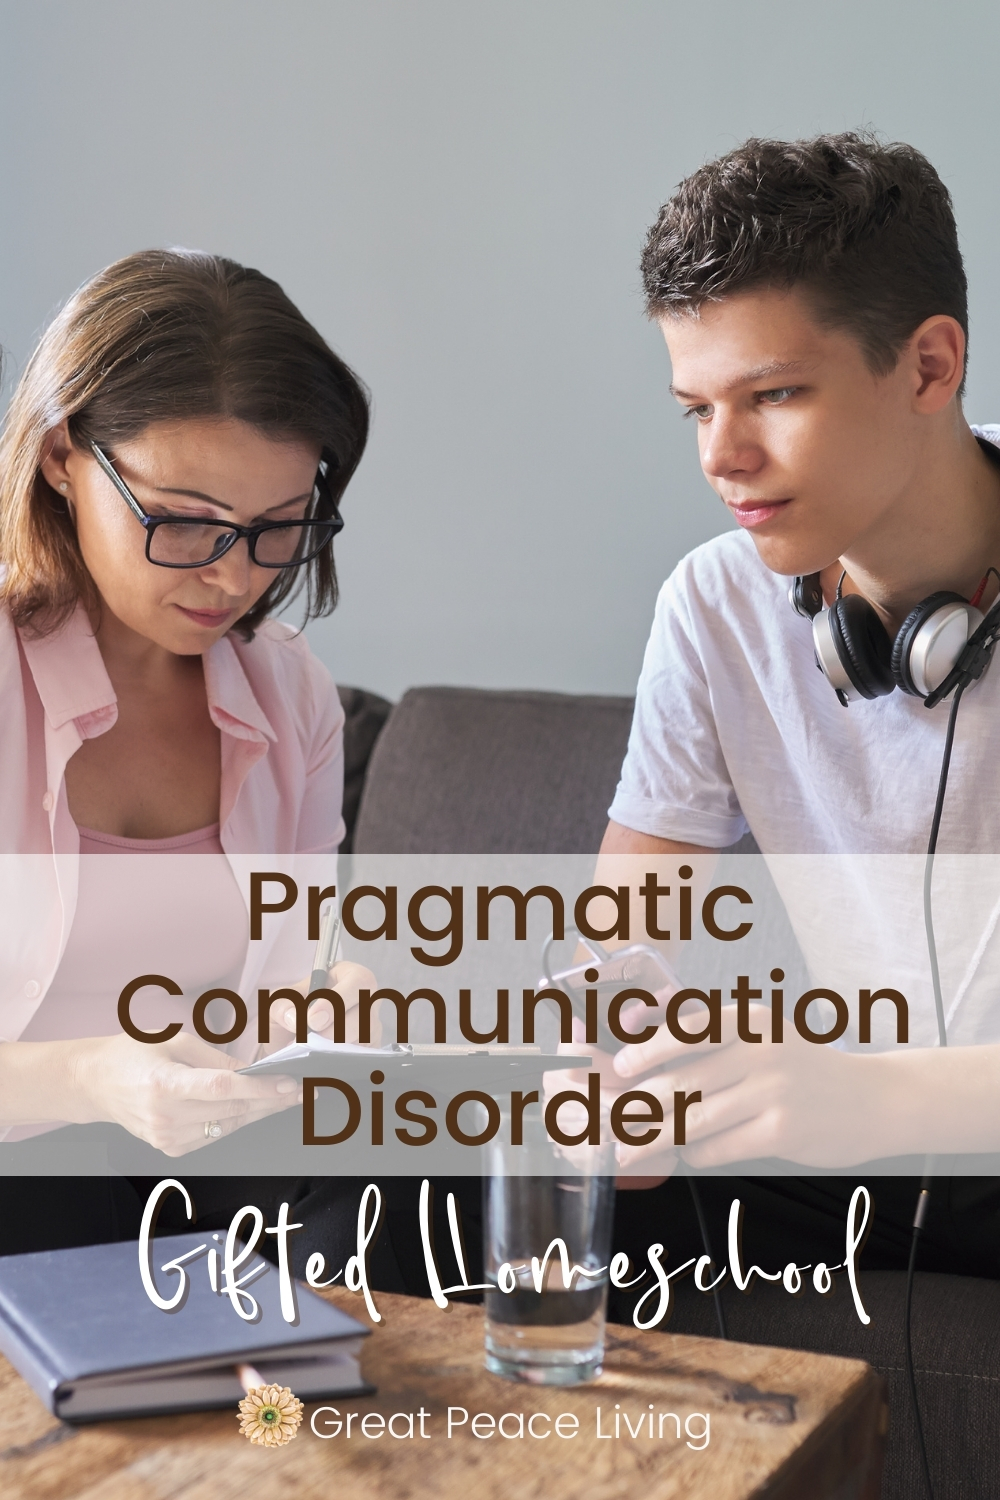 Finding Homeschool Help with Speech Therapy for Pragmatic Communication Disorder | Great Peace Living #homeschool #homeschooling #homeschoolmom #ihsnet #gifted #giftedhomeschool #gtchat #speechtherapy #spd #communicationdisorder